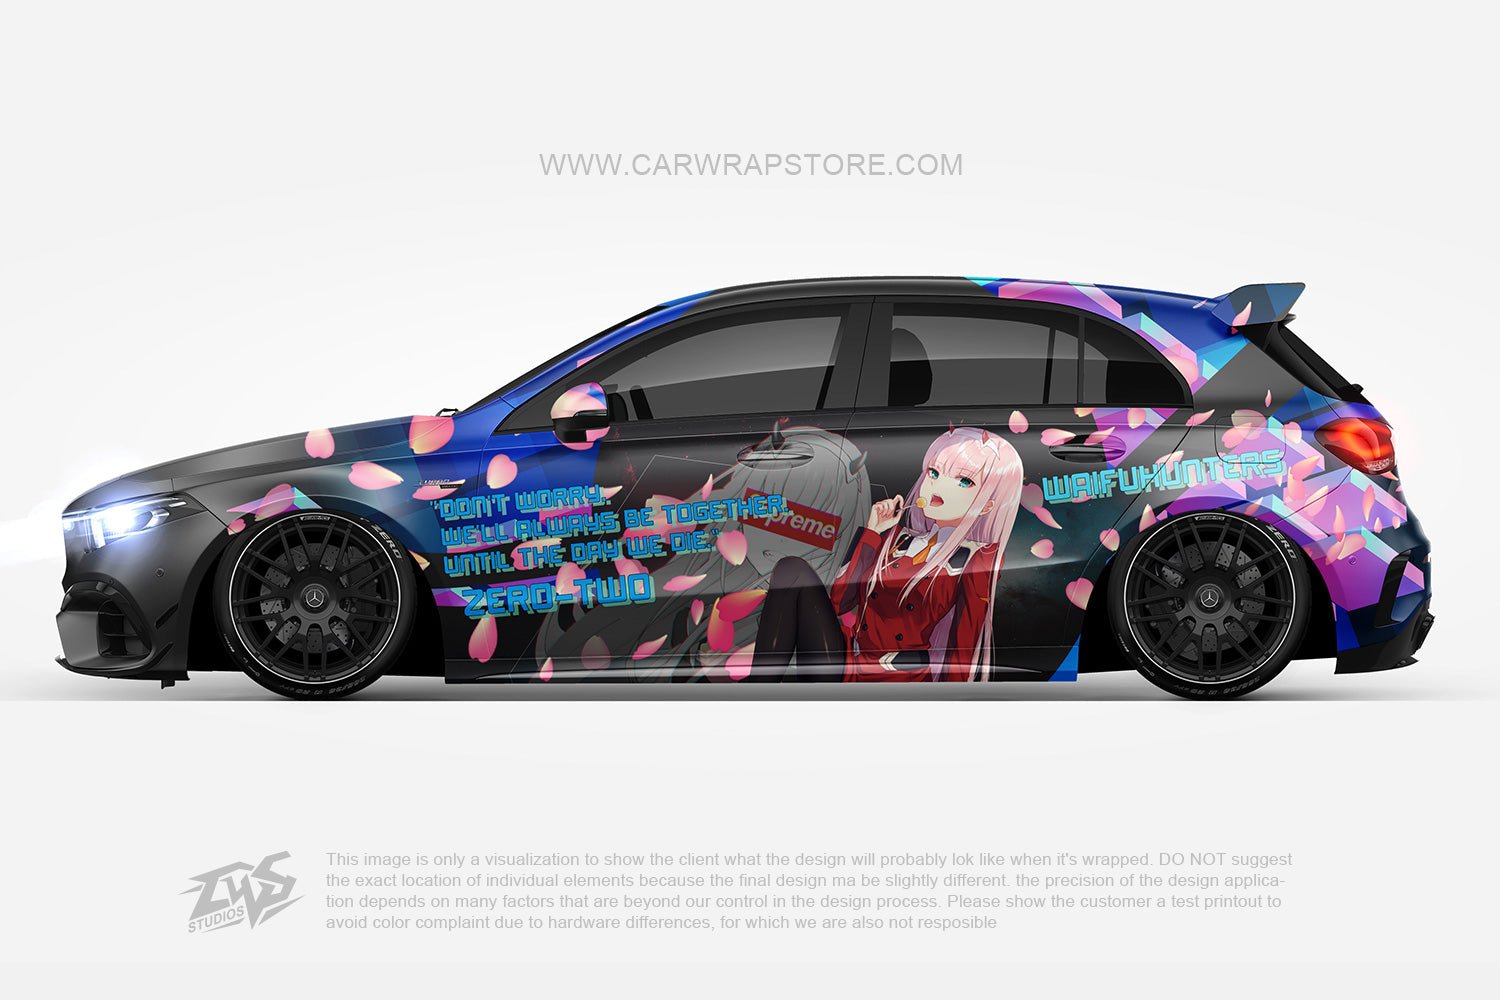 Zero Two DARLING in the FRANXX【002-07】 - Car Wrap Store